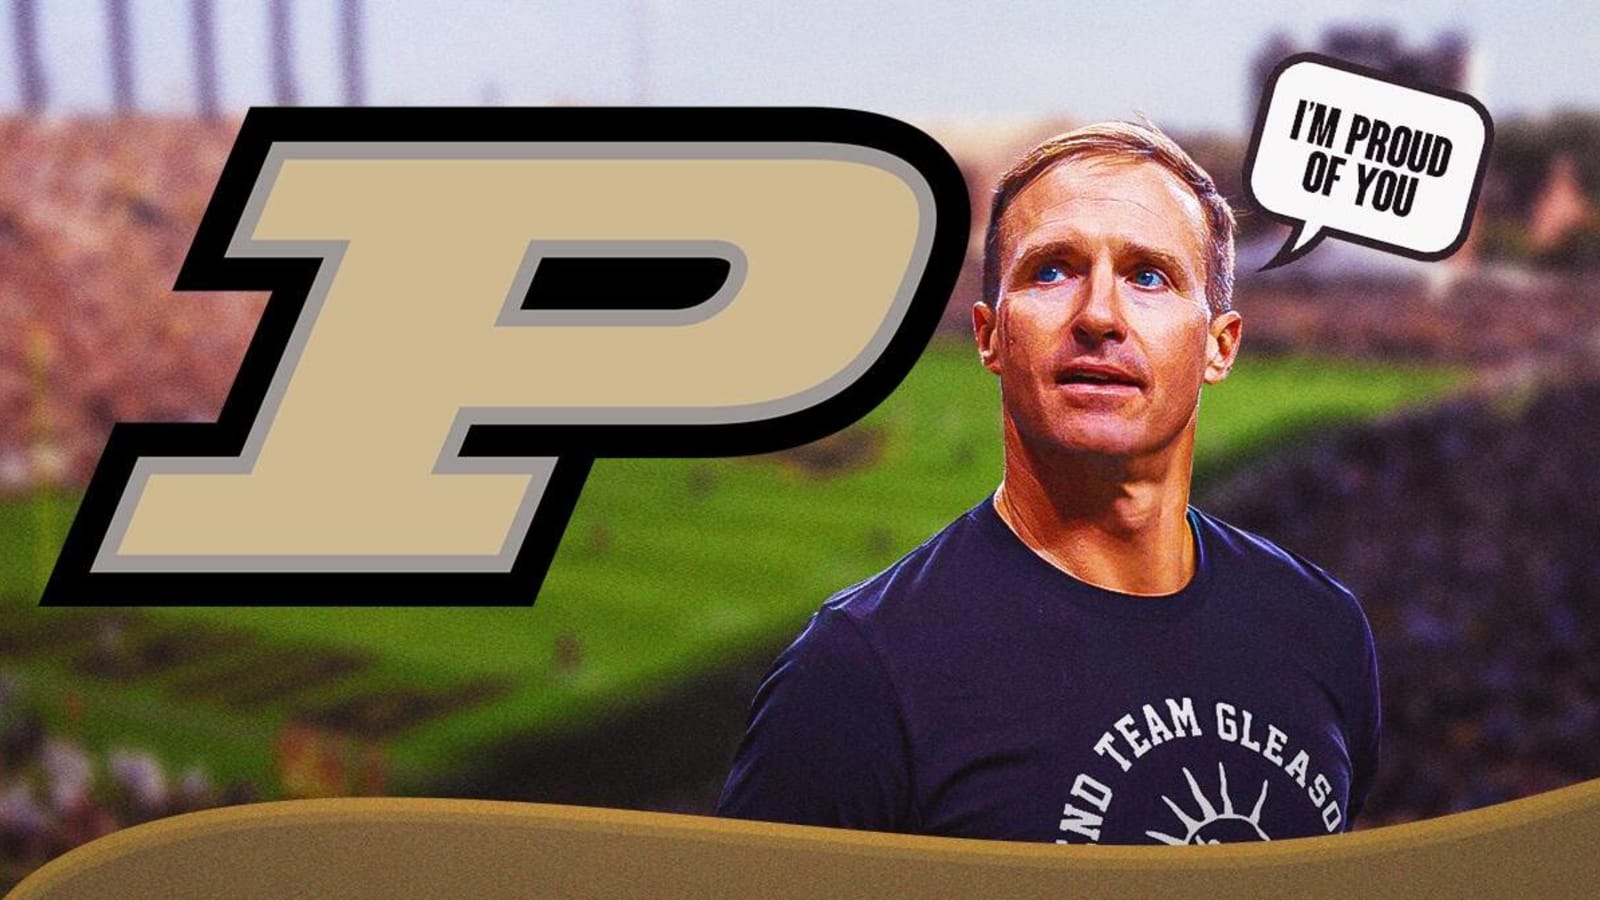 Purdue basketball’s Finals appearance prompts beautiful Drew Brees reaction